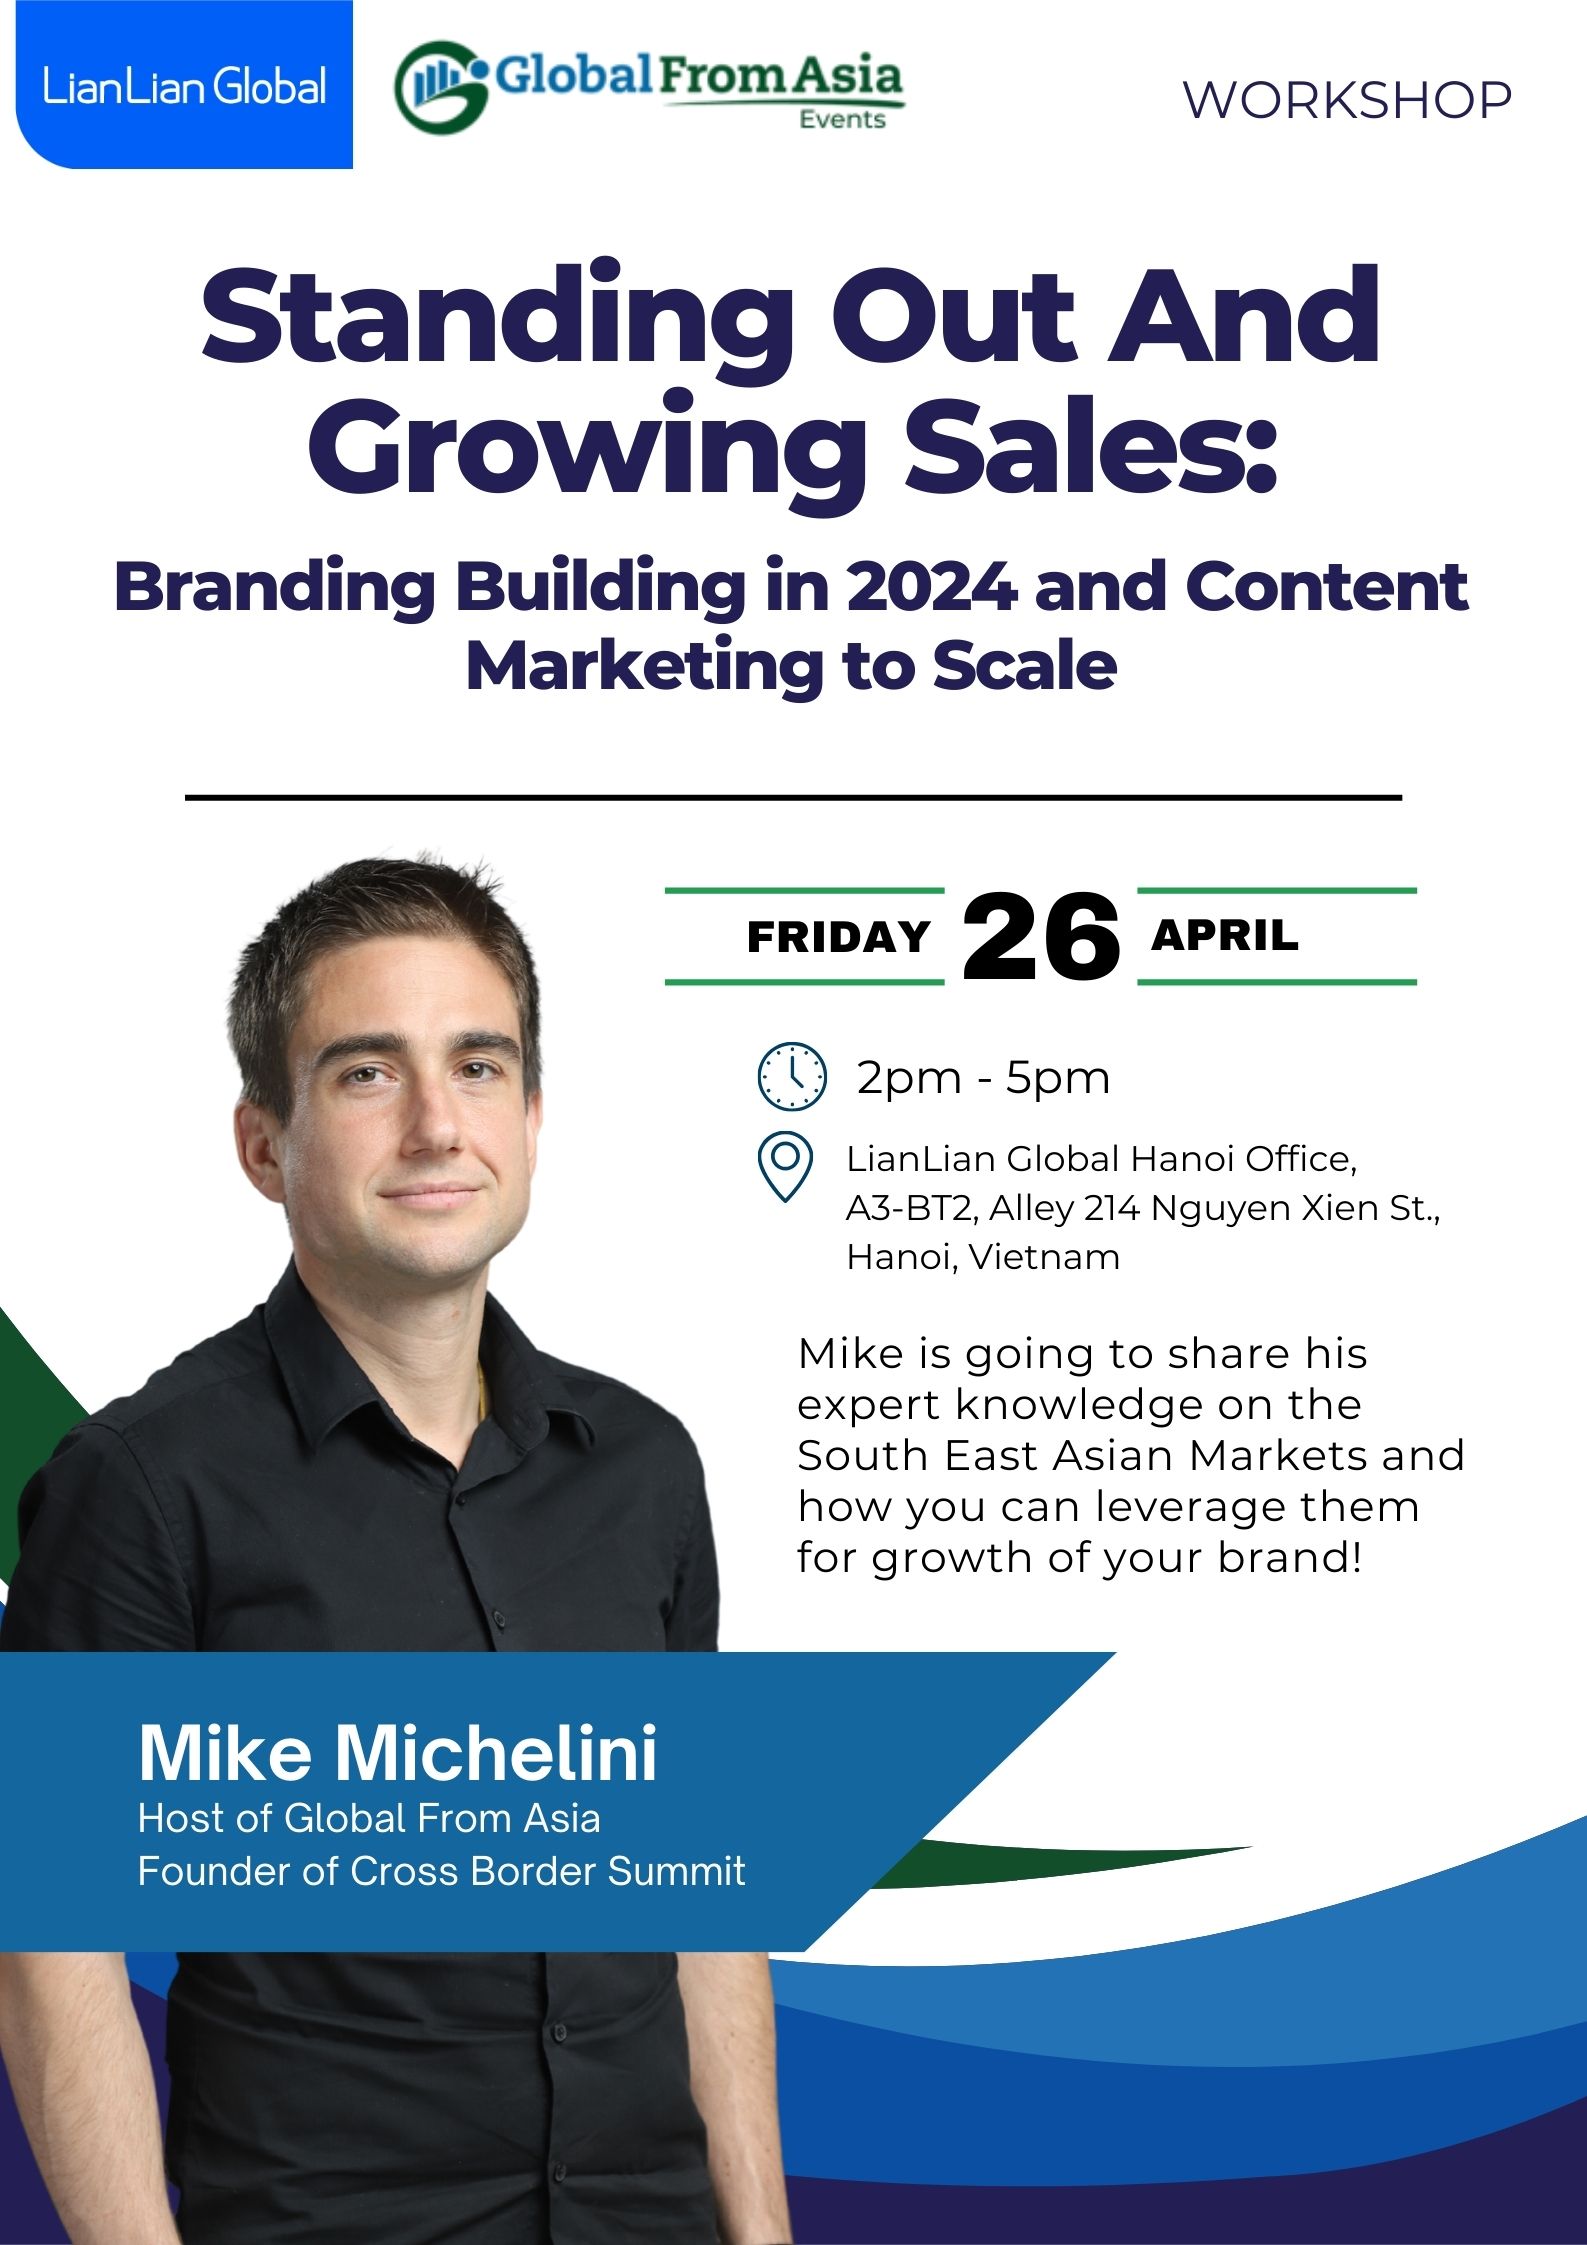 Standing Out And Growing Sales – Branding Building in 2024 and Content Marketing to Scale